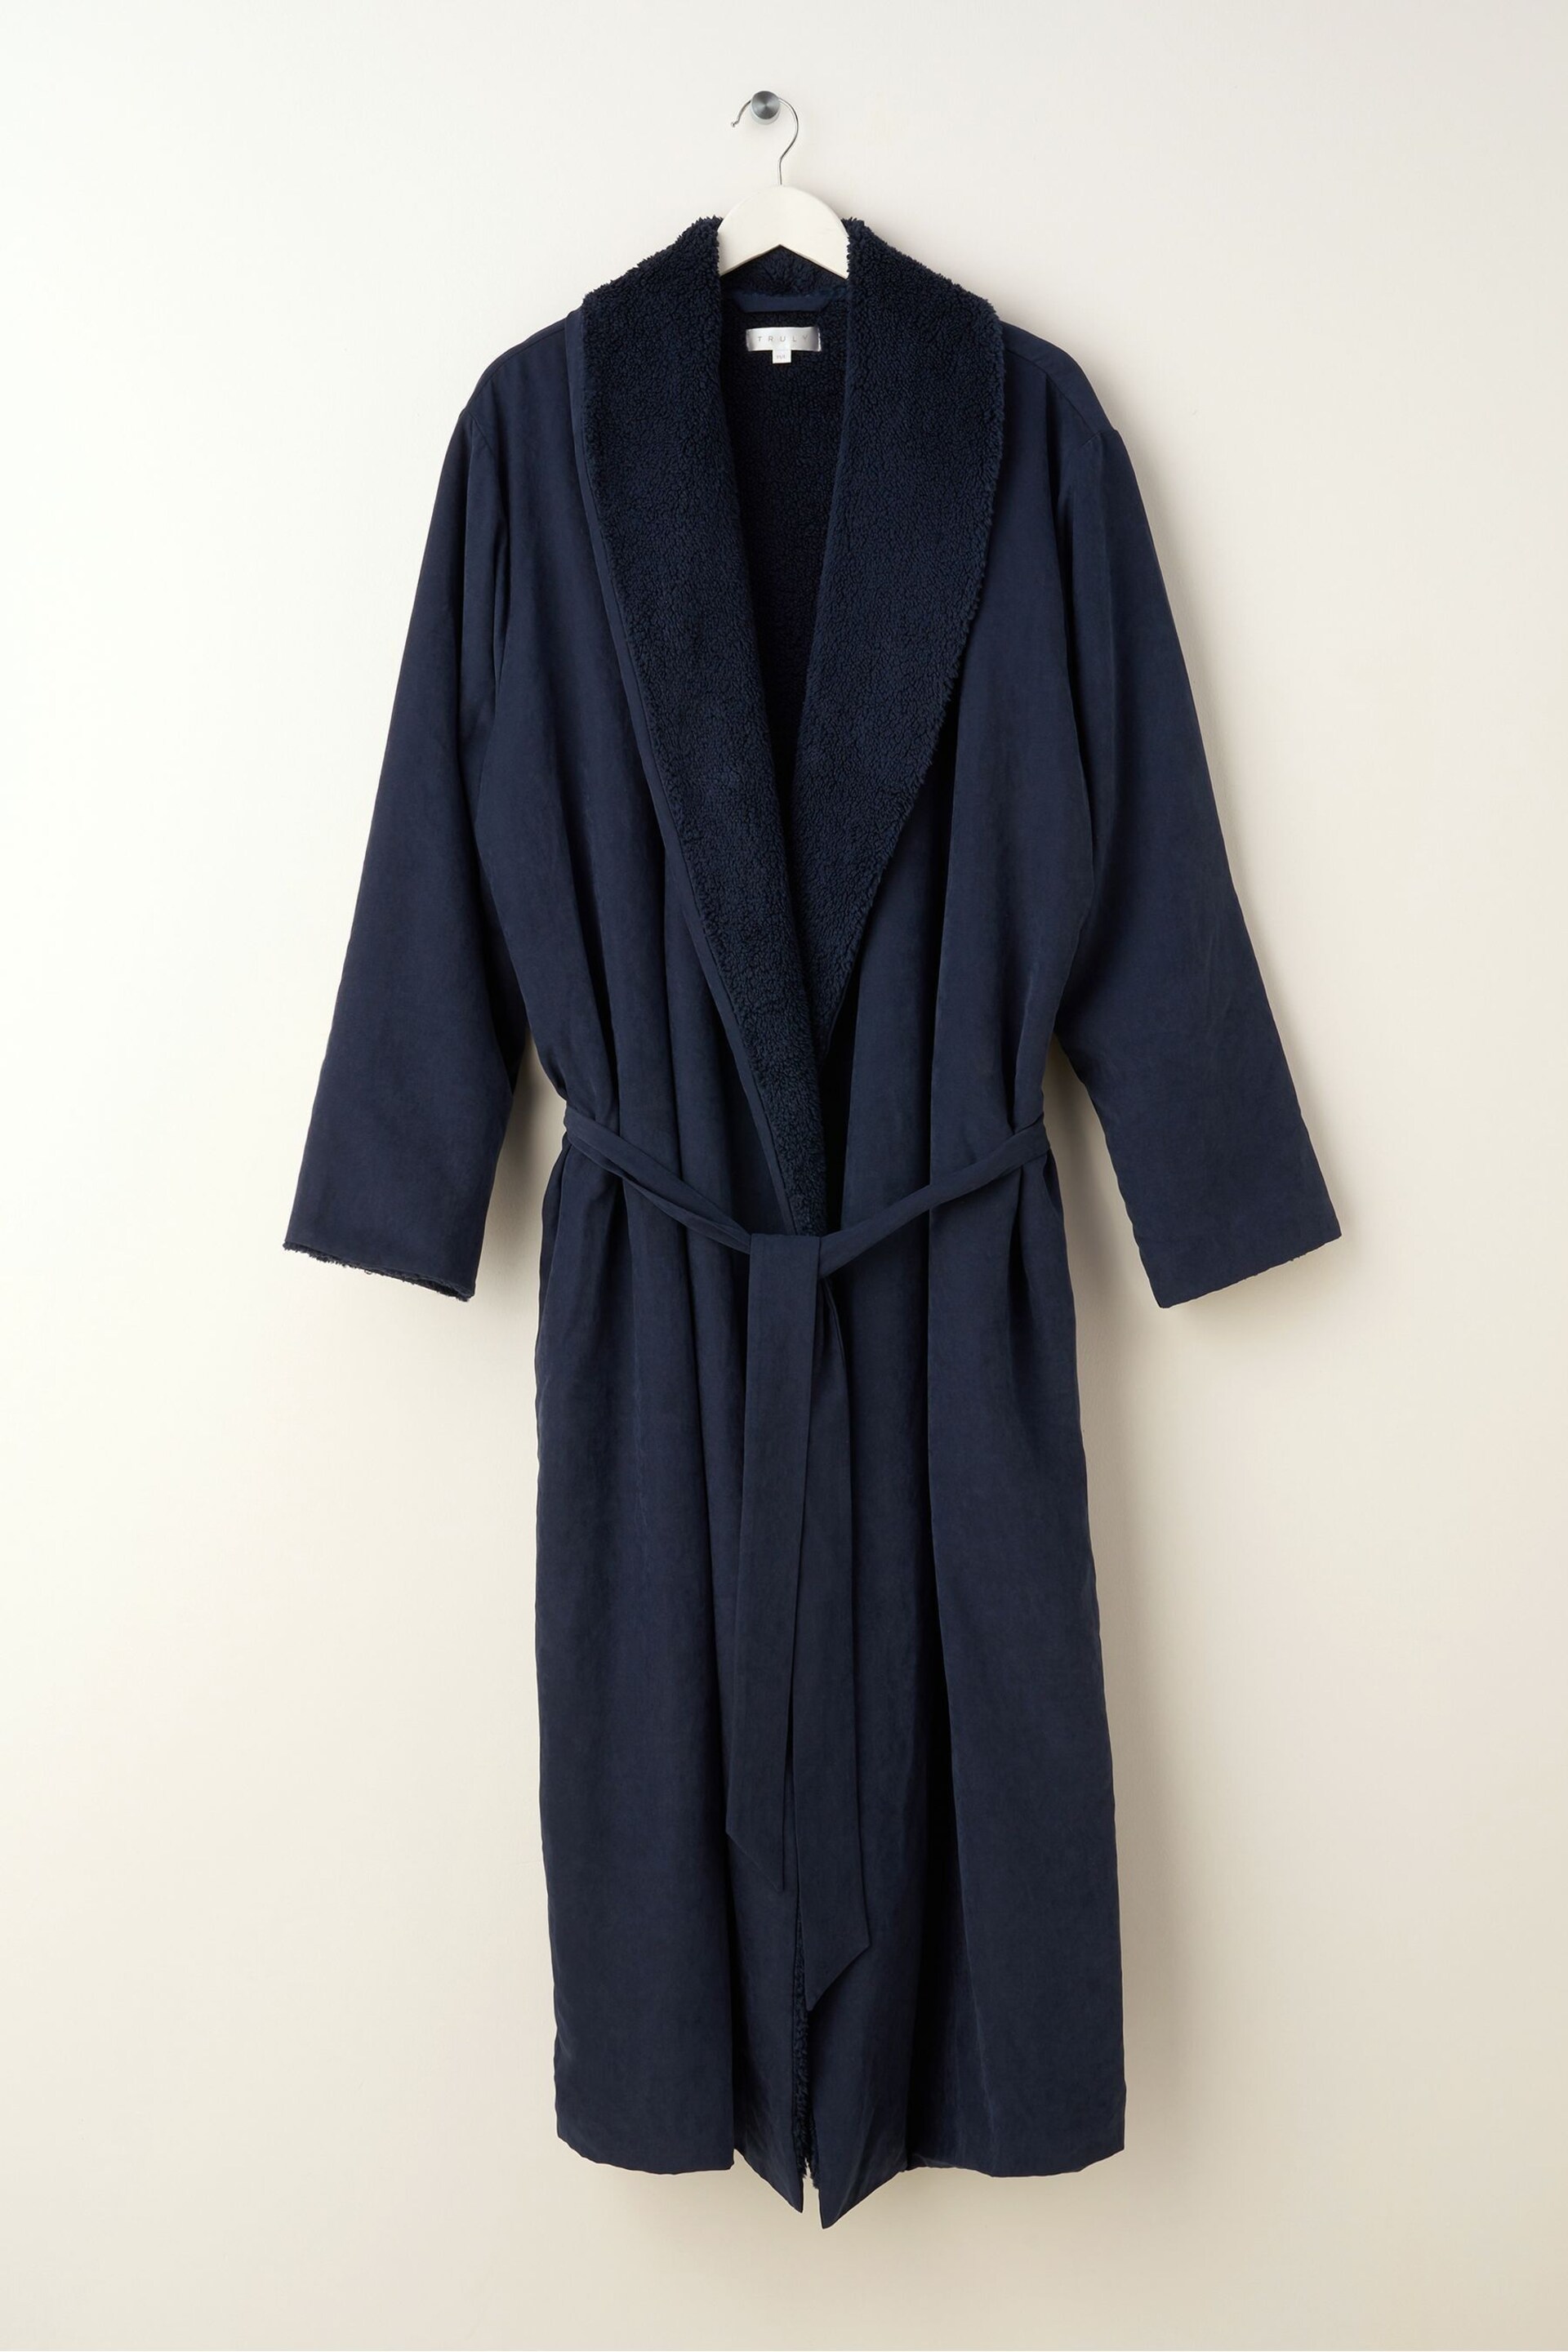 Truly Navy Blue Fleece Dressing Gown - Image 4 of 4